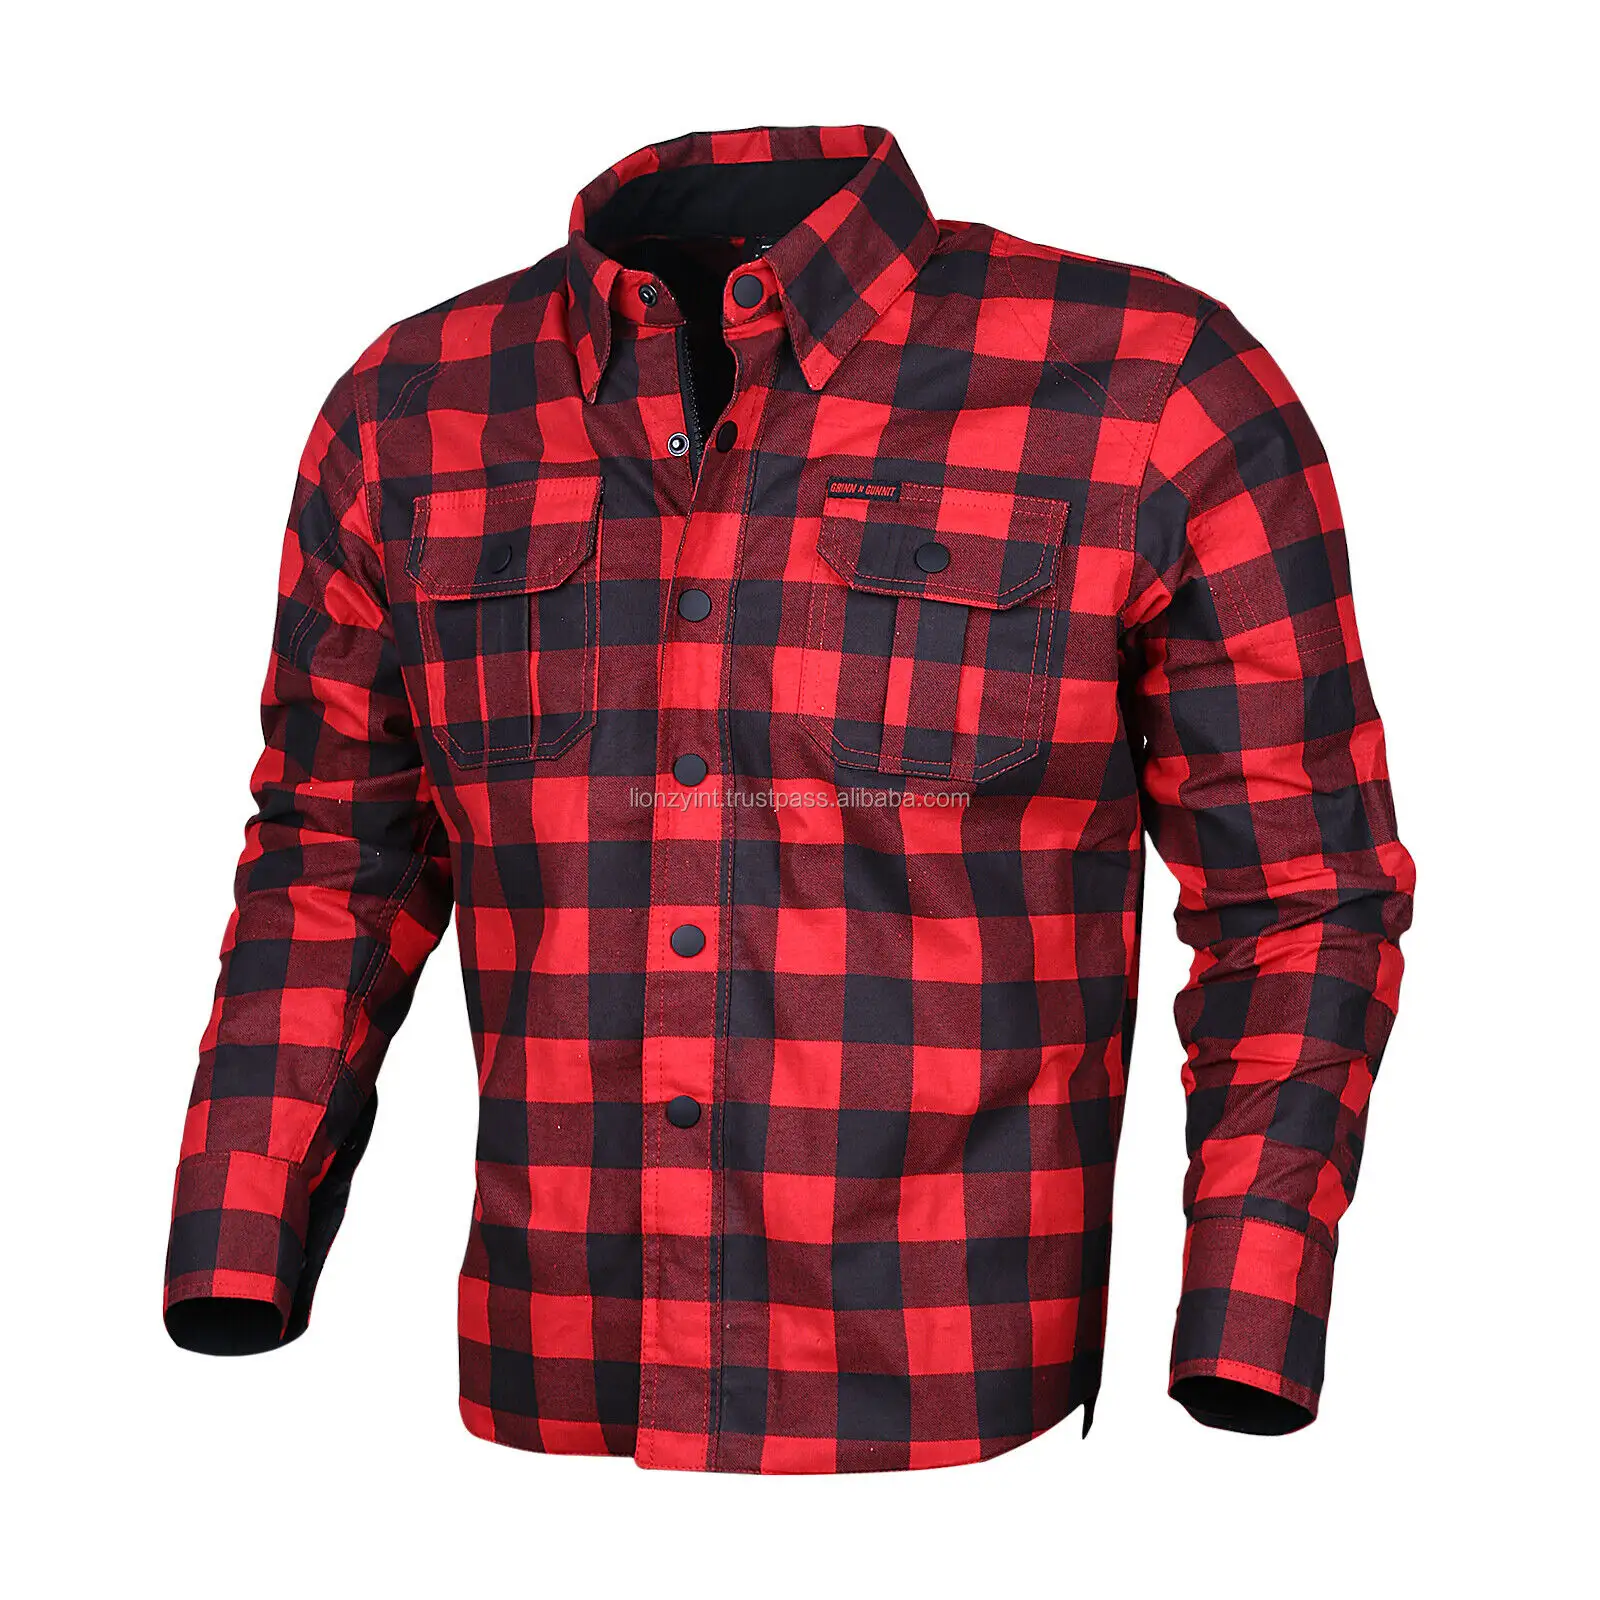 Red Black Cheap Price Motorcycle Flannel Shirt with CE Certified Armors Mens Biker Motorcycle Lumberjack Shirt